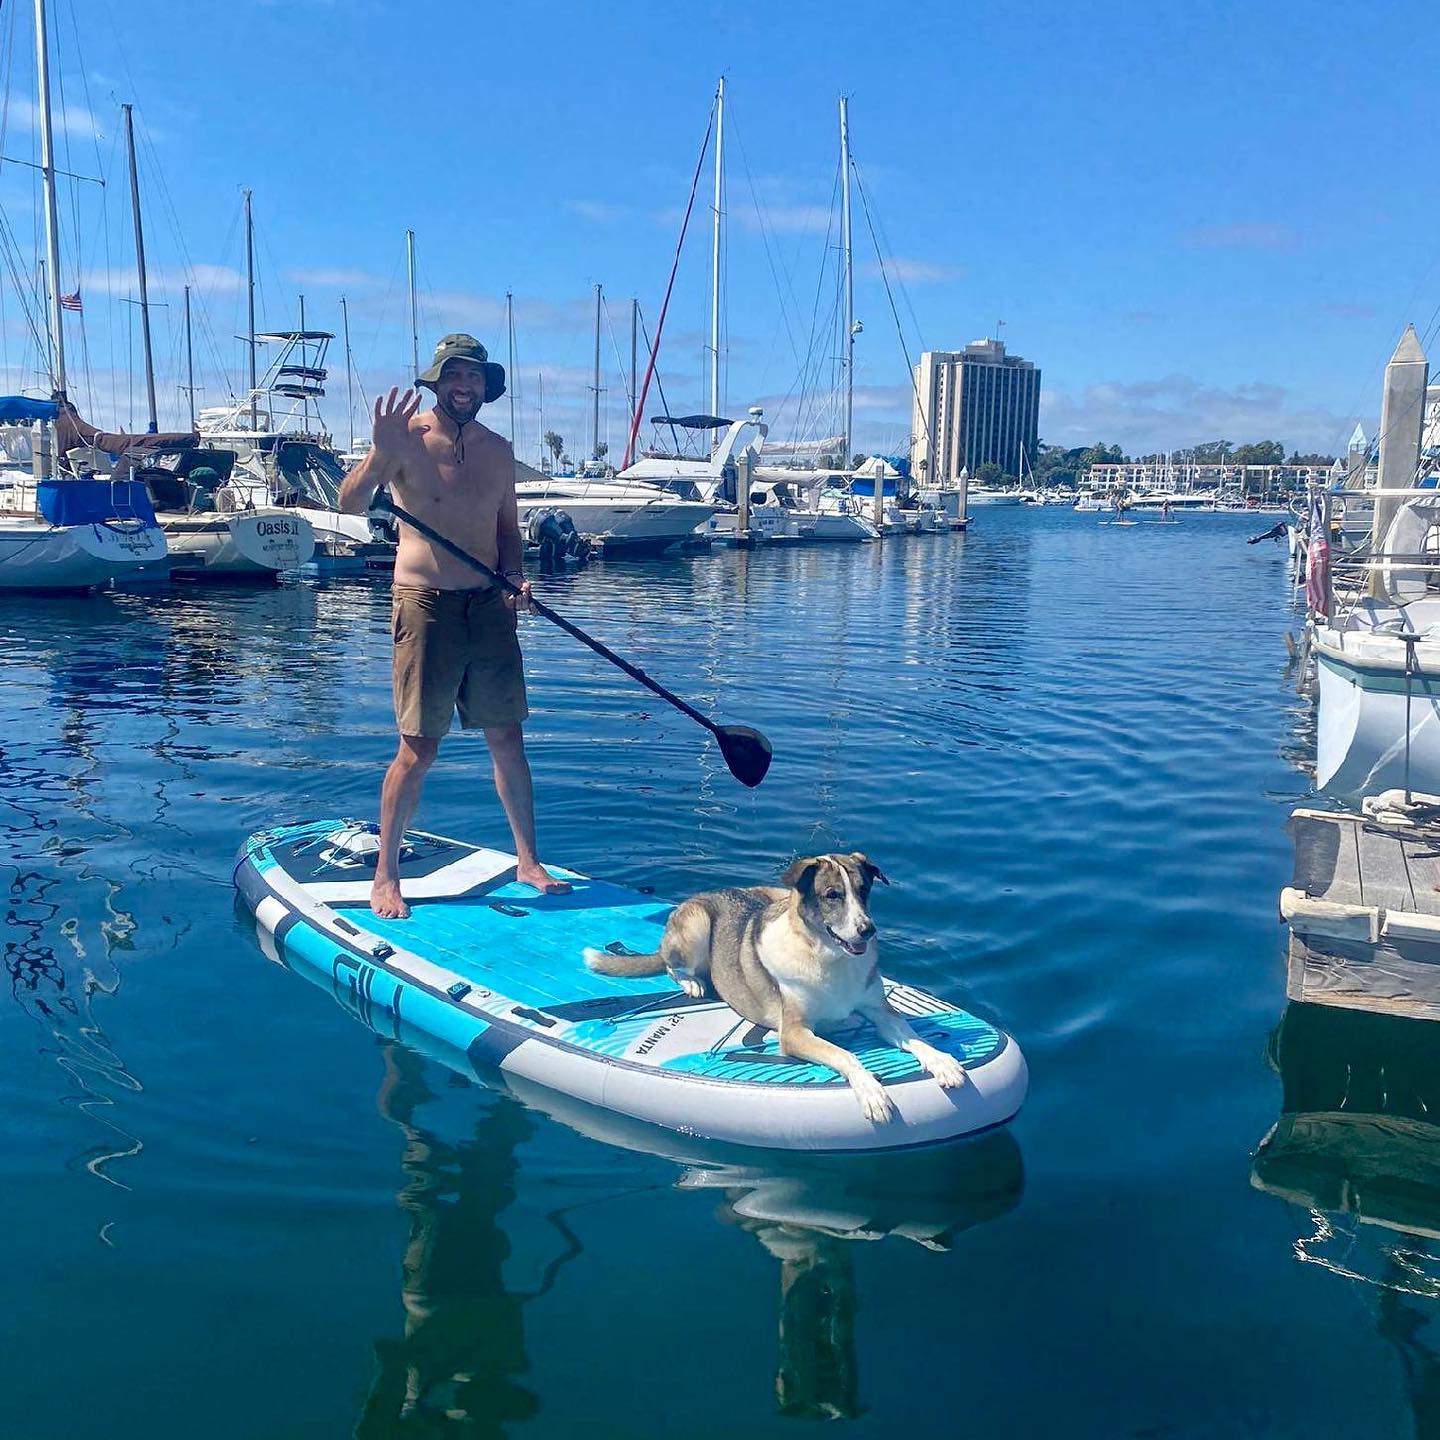 Man with dog on SUP with Bixpy motor